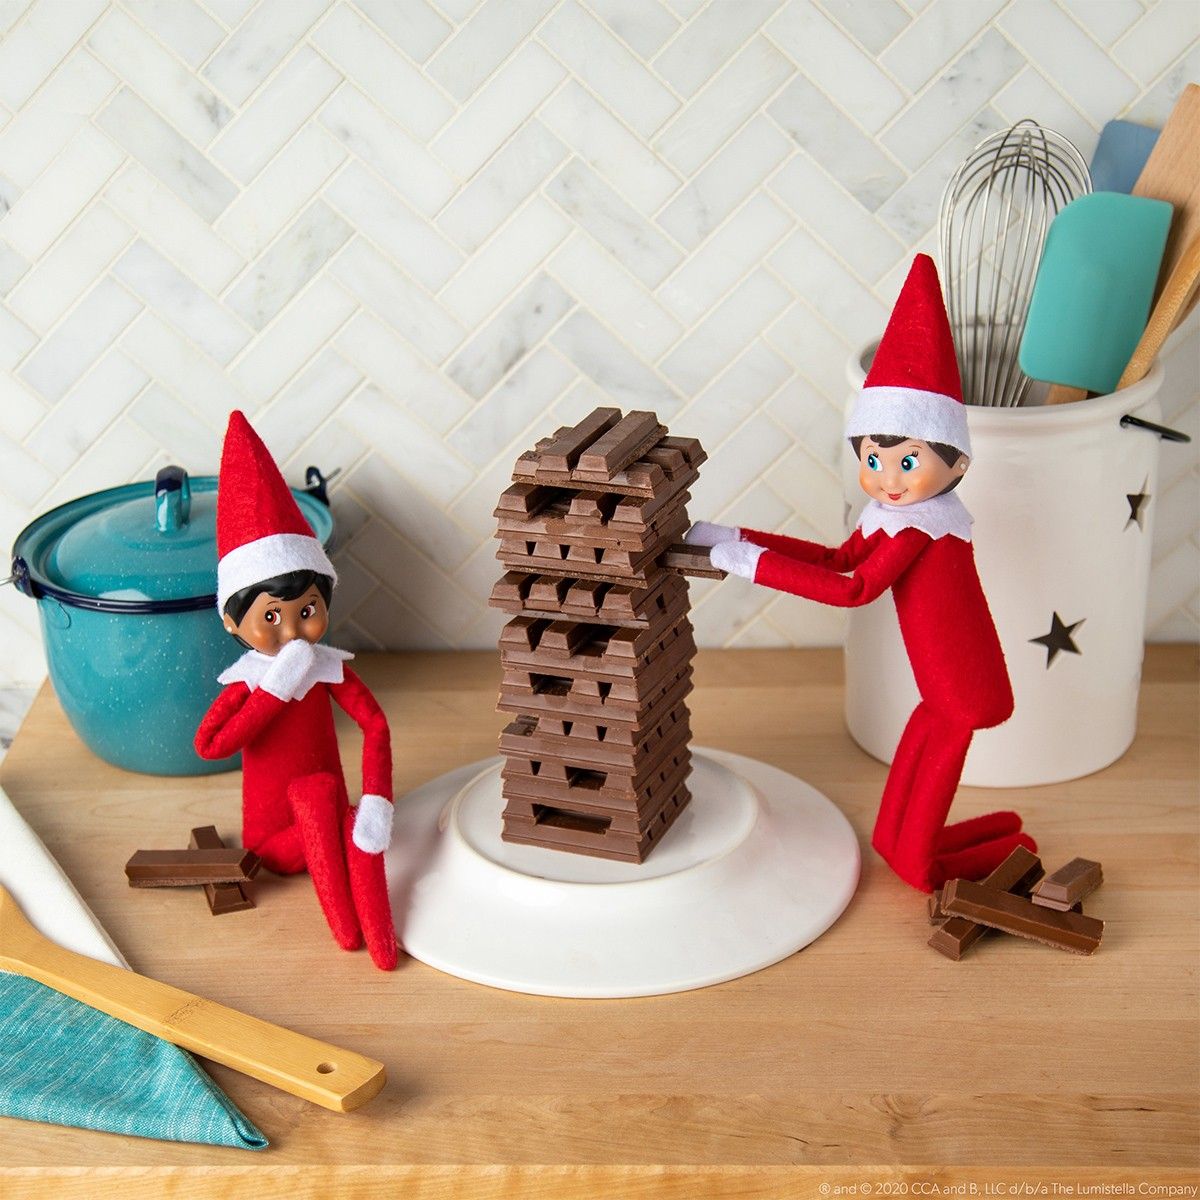 Elf on the shelf ideas: 10 creative (and easy) ideas to try this year